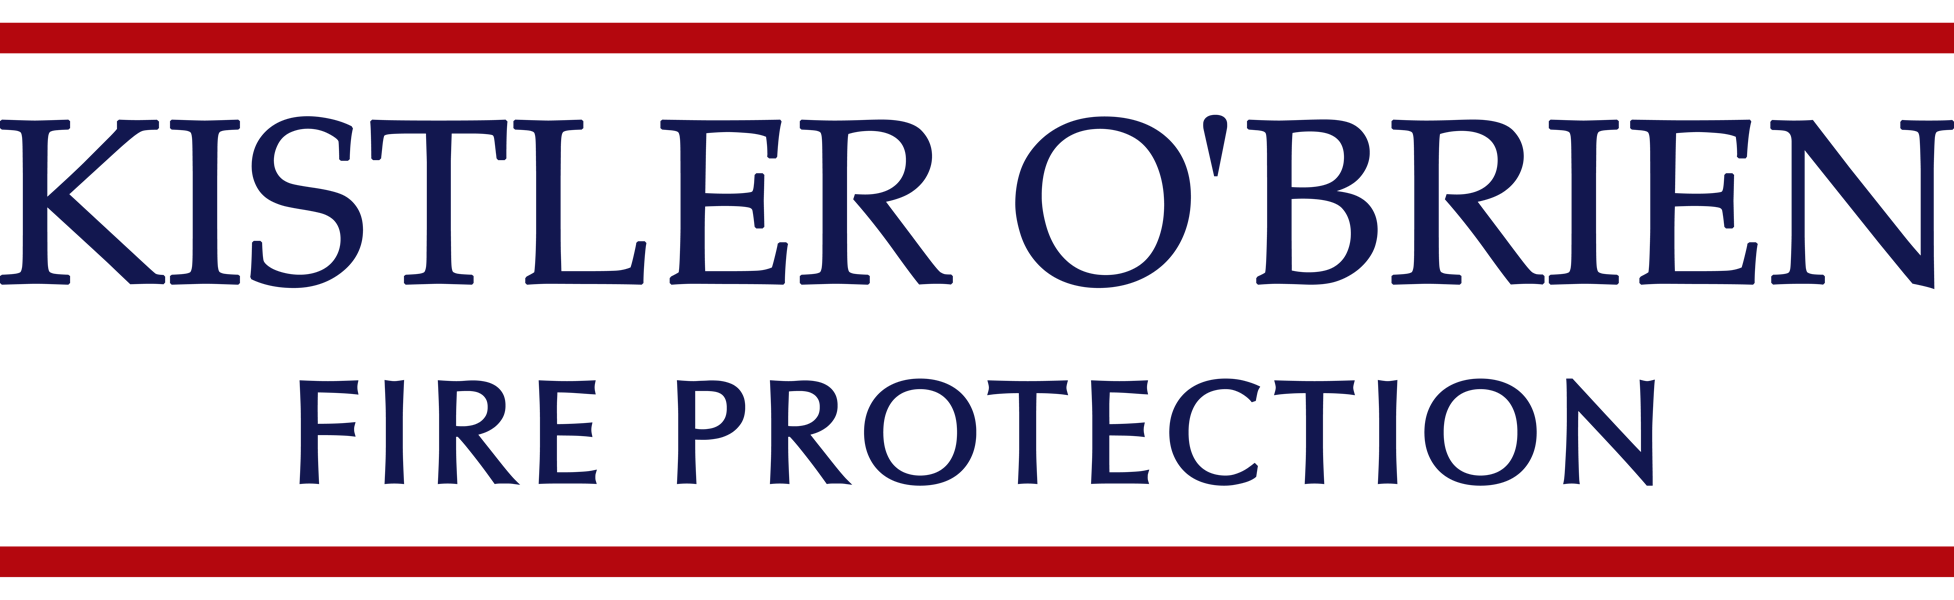 kistler-obrien-fire-protection-fire-protection-service-reading.png